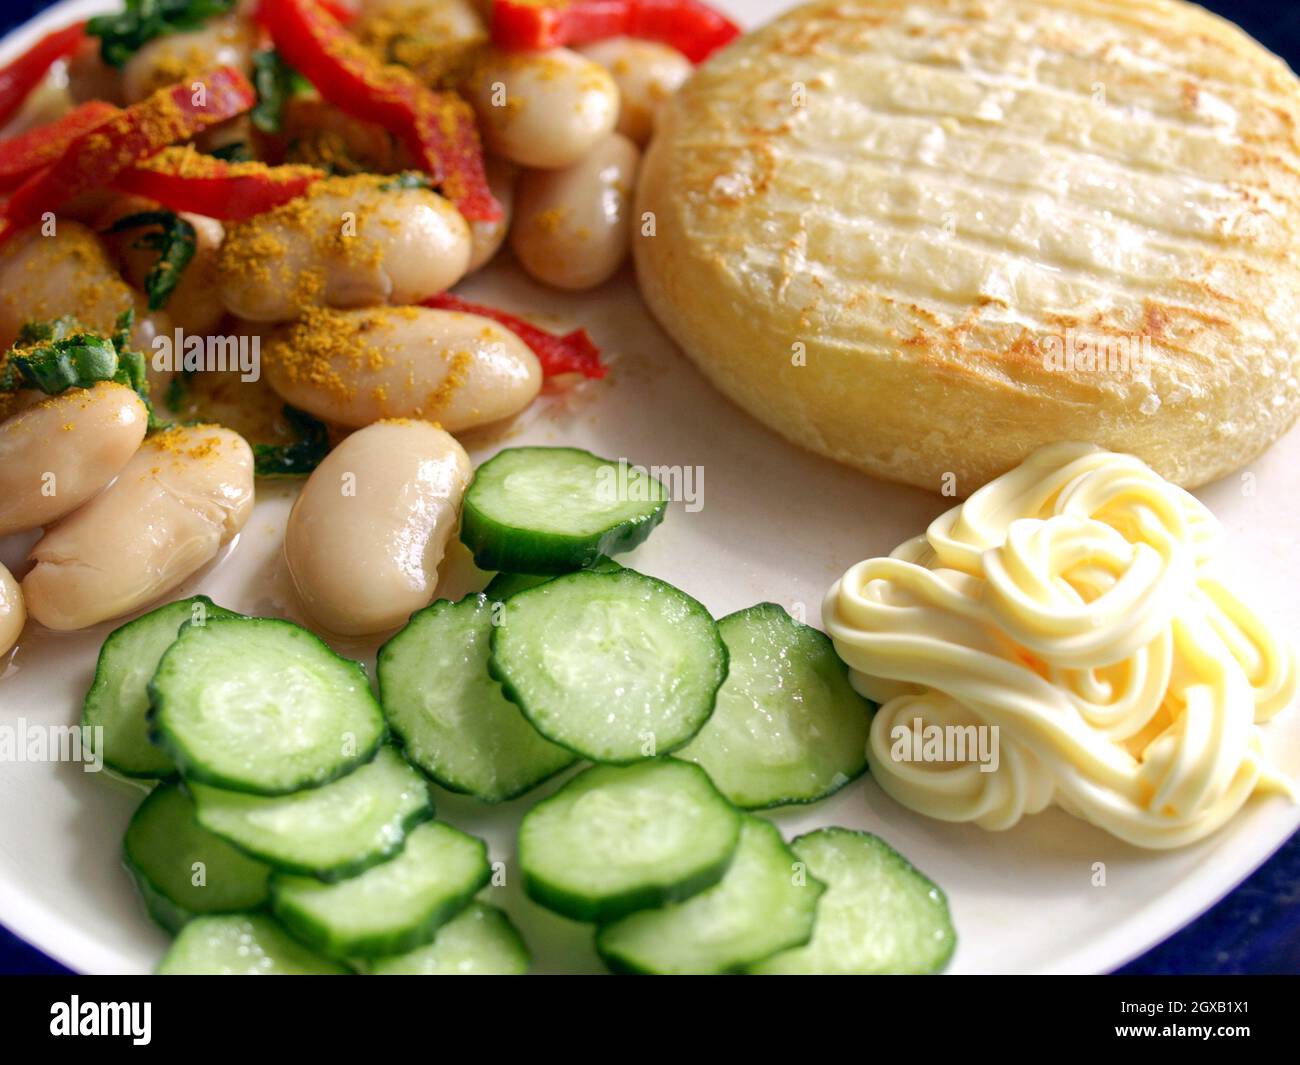 Vegetarian main dish including cheese, mayonnaise, curry beans, peppers and cucumbers. Stock Photo